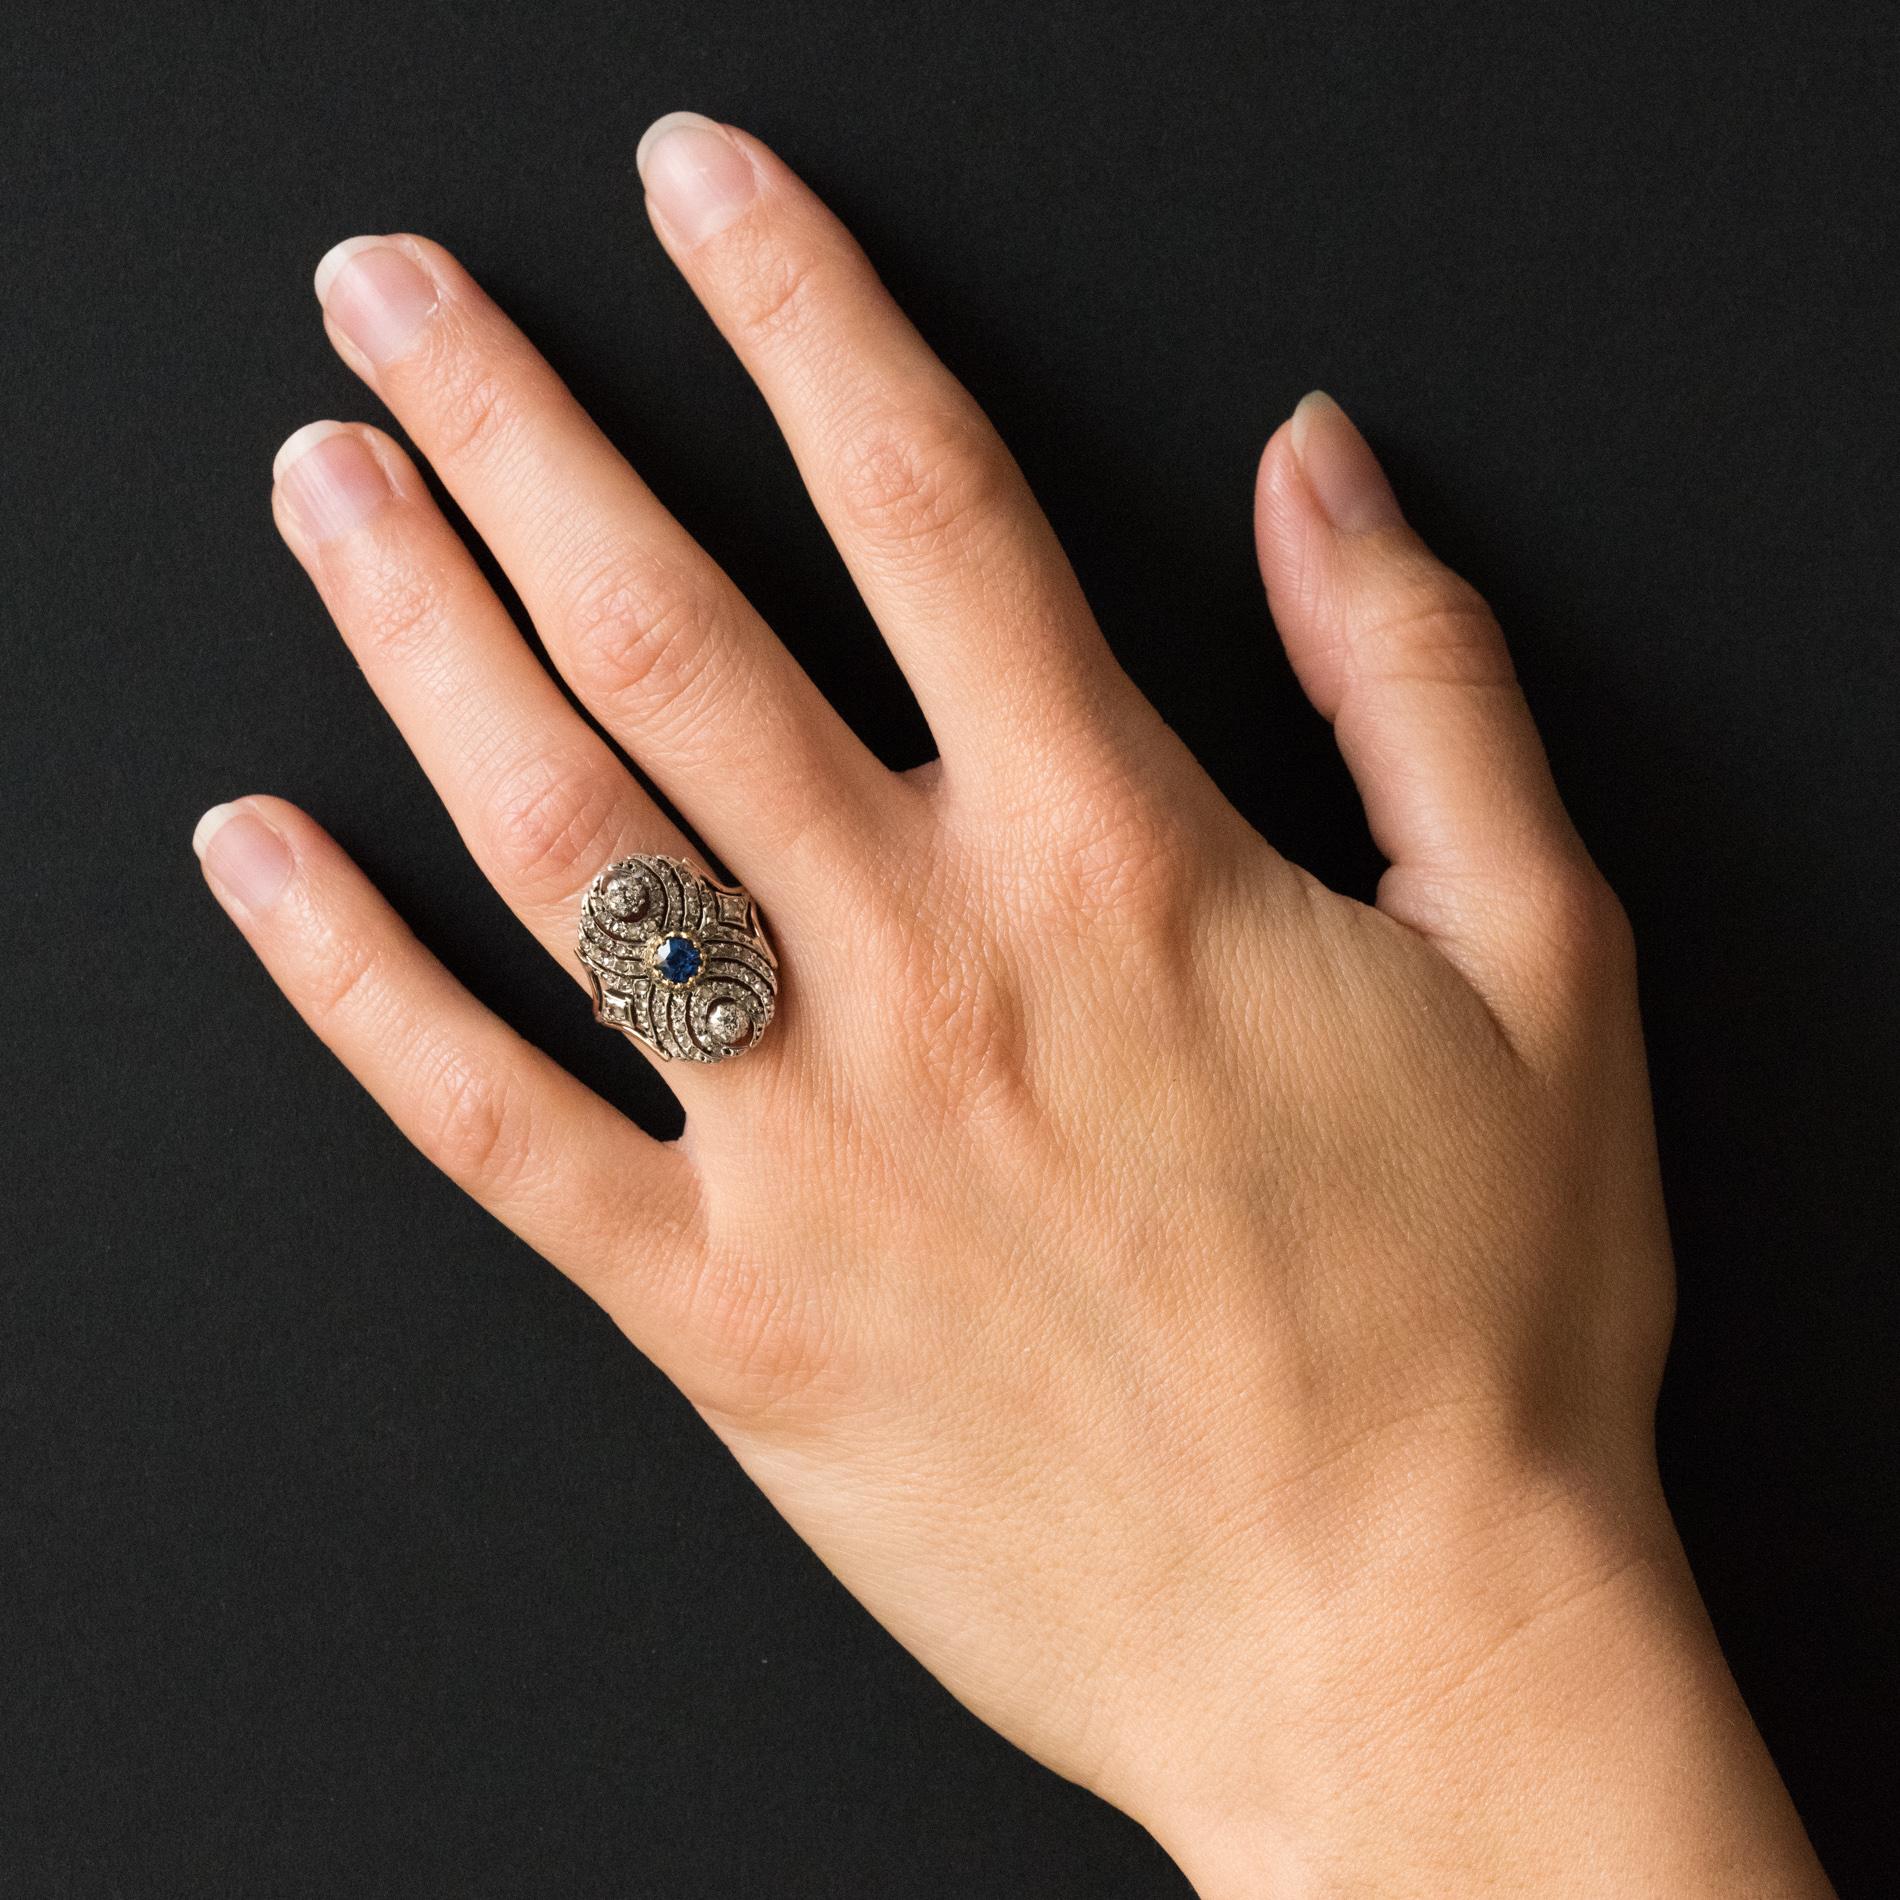 Ring in 18 Karats rose gold ring, eagle's head hallmark and silver.
Lovely antique ring, it is set in the center with lowered claws of a cushion-cut sapphire and 2 antique brilliant-cut diamonds also with lowered claws. The whole openwork tray is